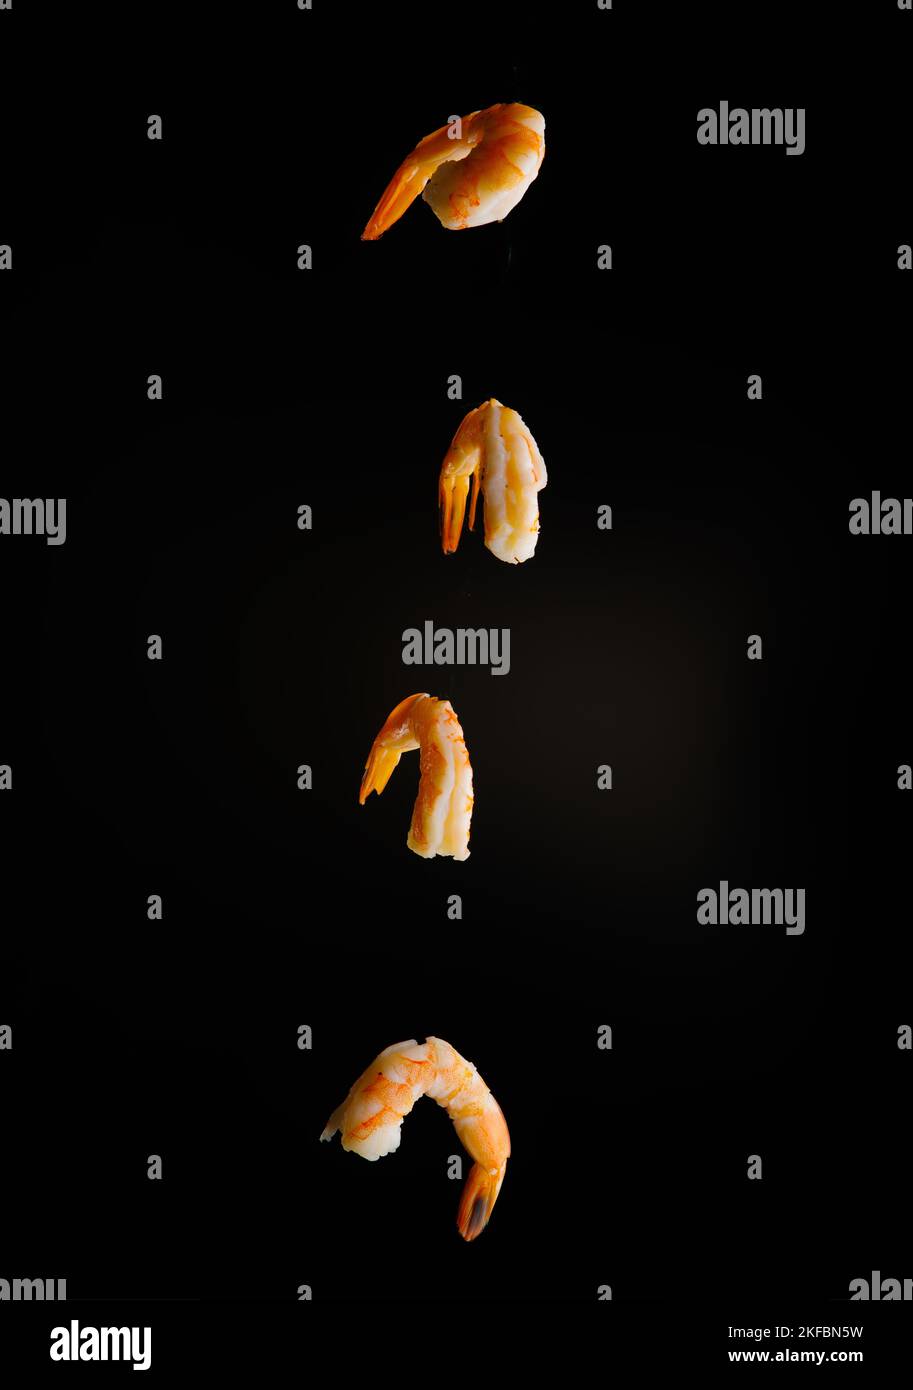 Appetizing orange shrimps in the frozen flight on a black background. Product ready to use. Healthy food, vitamins, proteins. Recipe book, food blog. Stock Photo